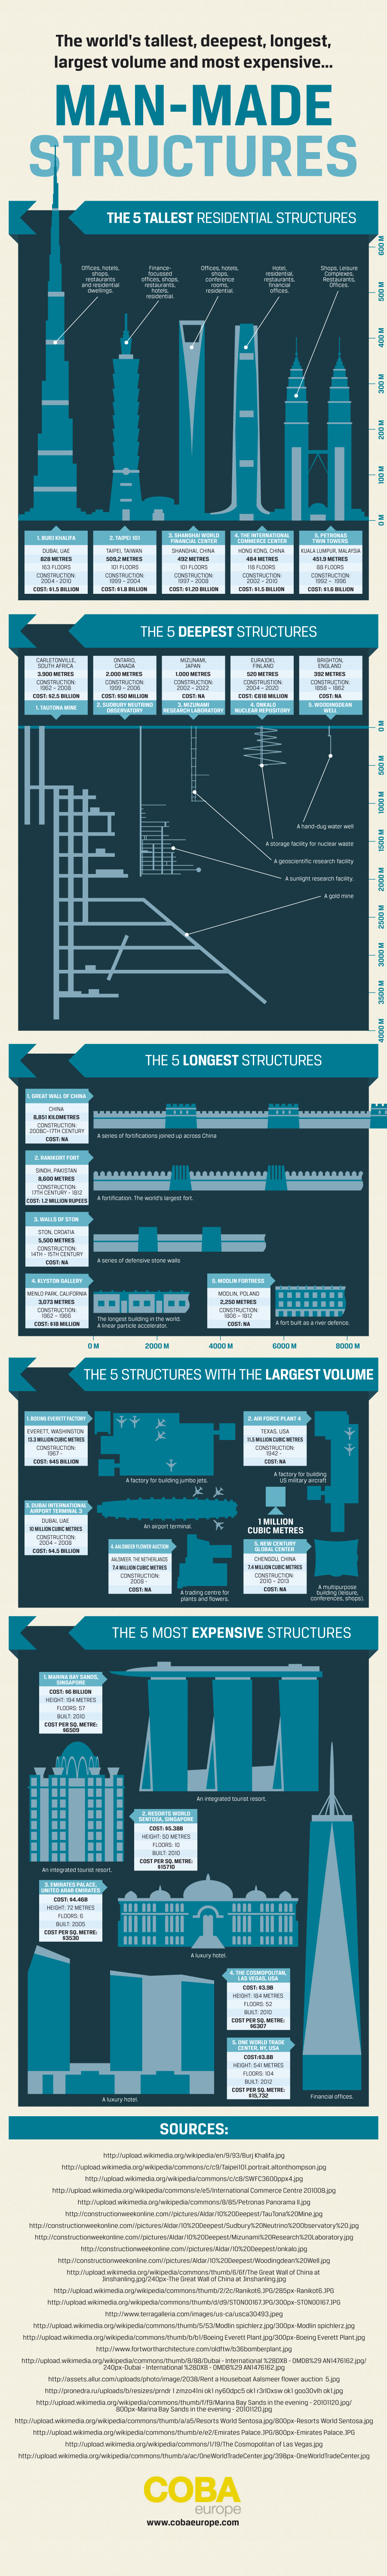 Manmade structures infographic V5